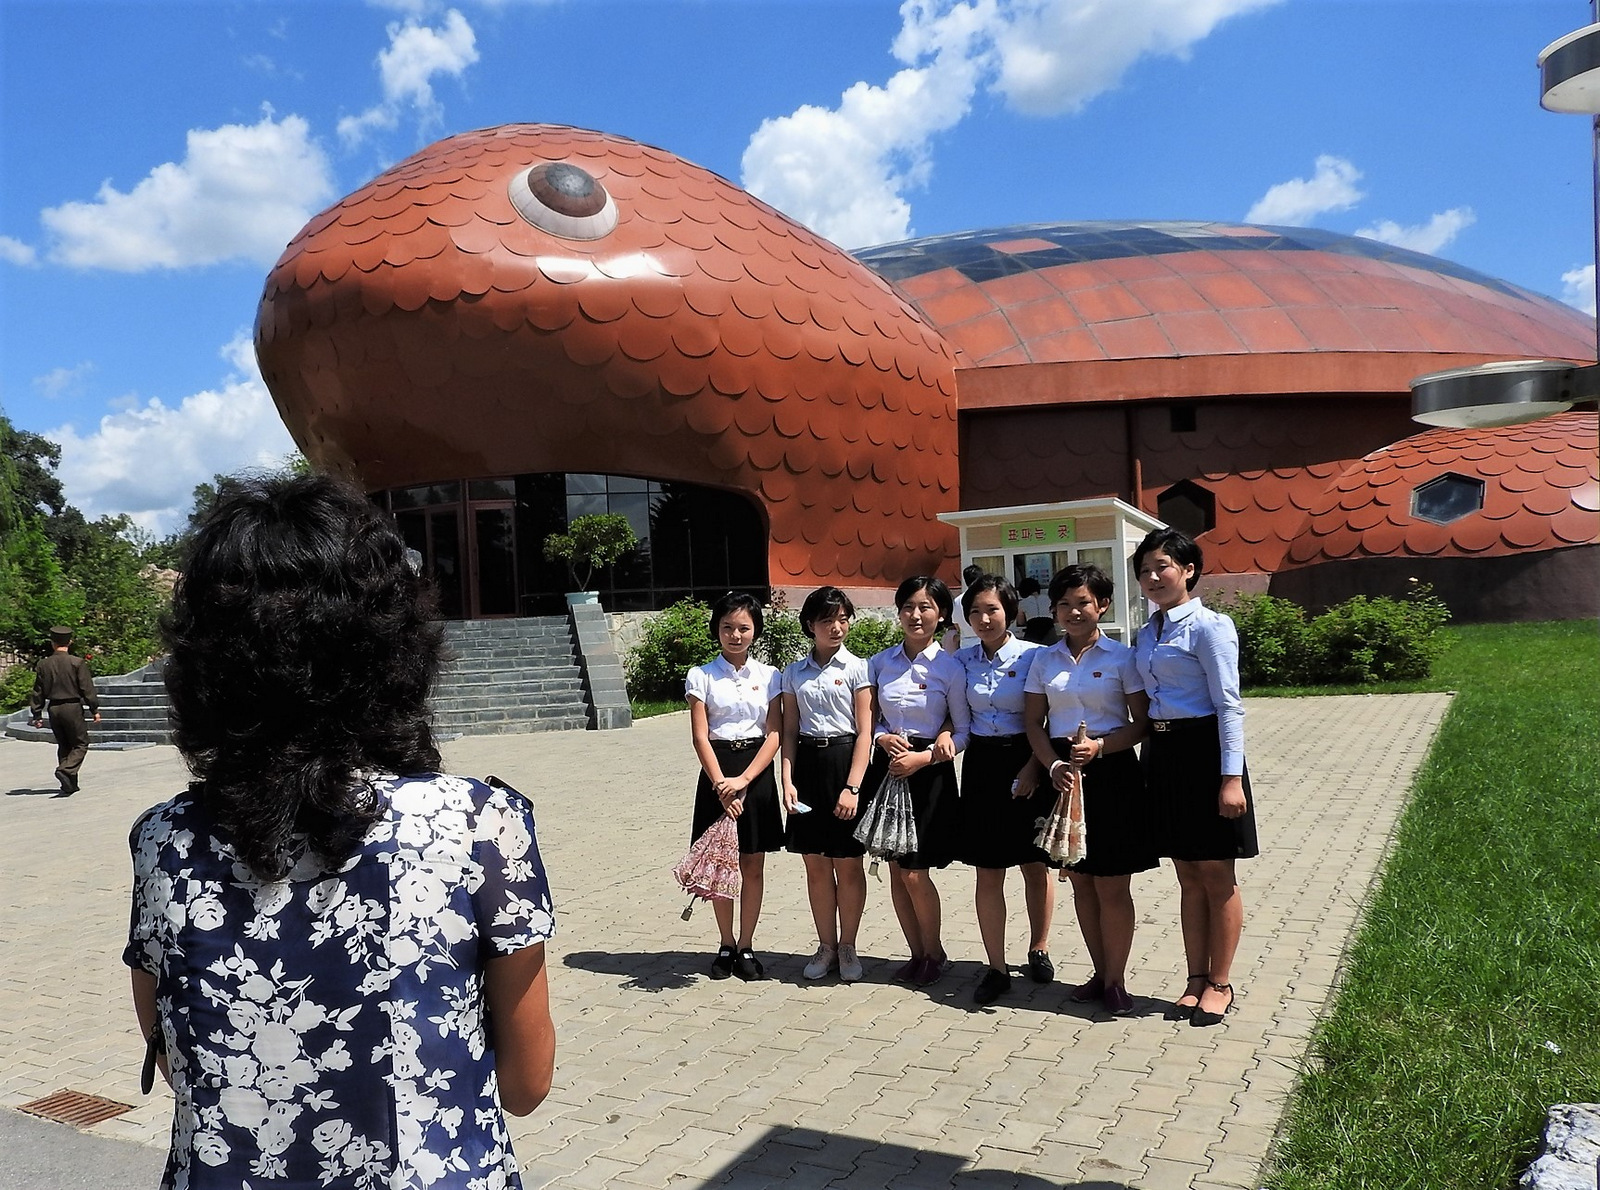 A group of schoolgirls pause for a portrait photo at Pyongyang's zoo.